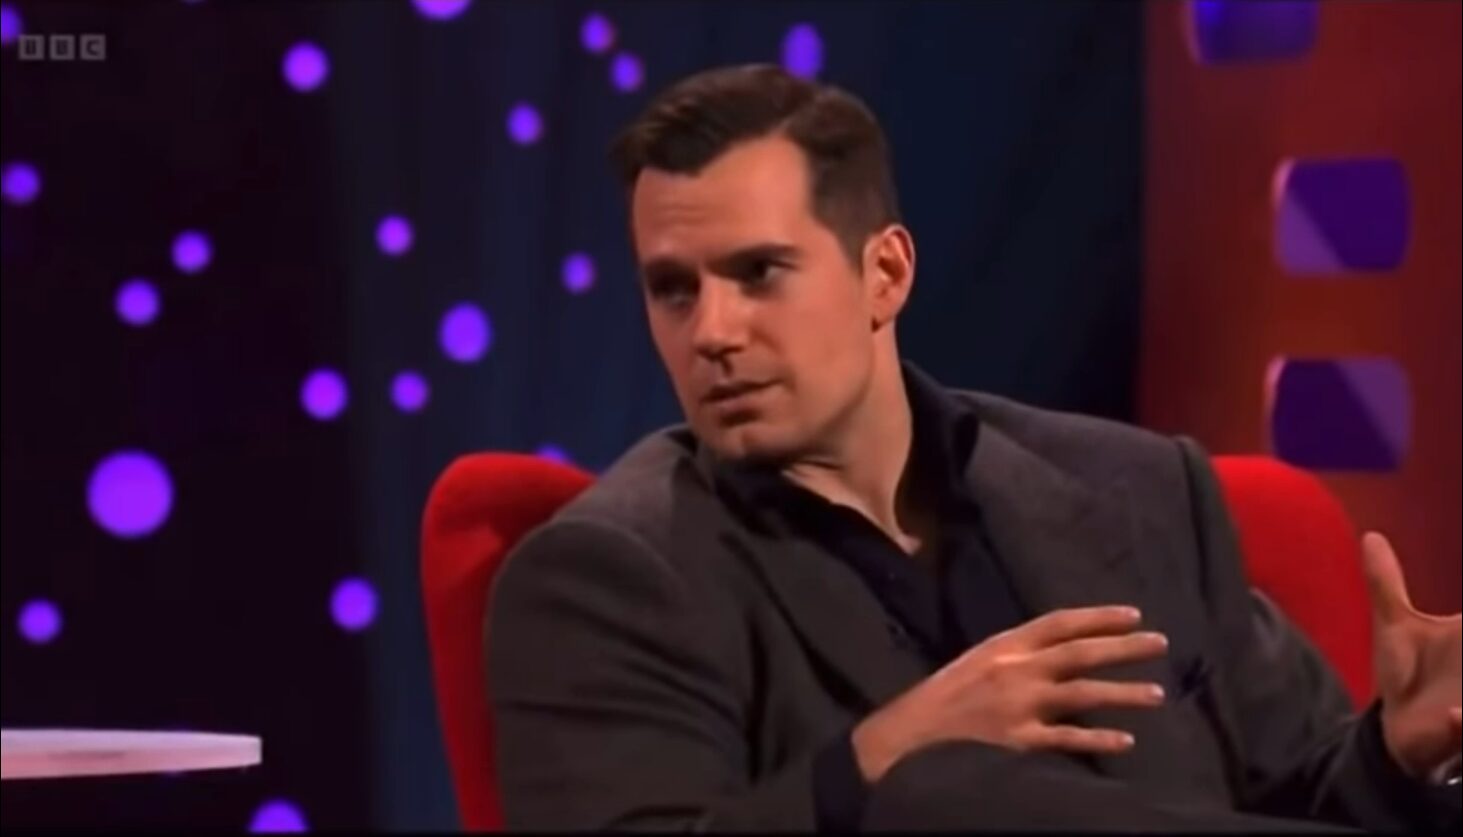 Henry Cavill (Politely) Explains The Difference Between Warcraft And Warhammer To Graham Norton